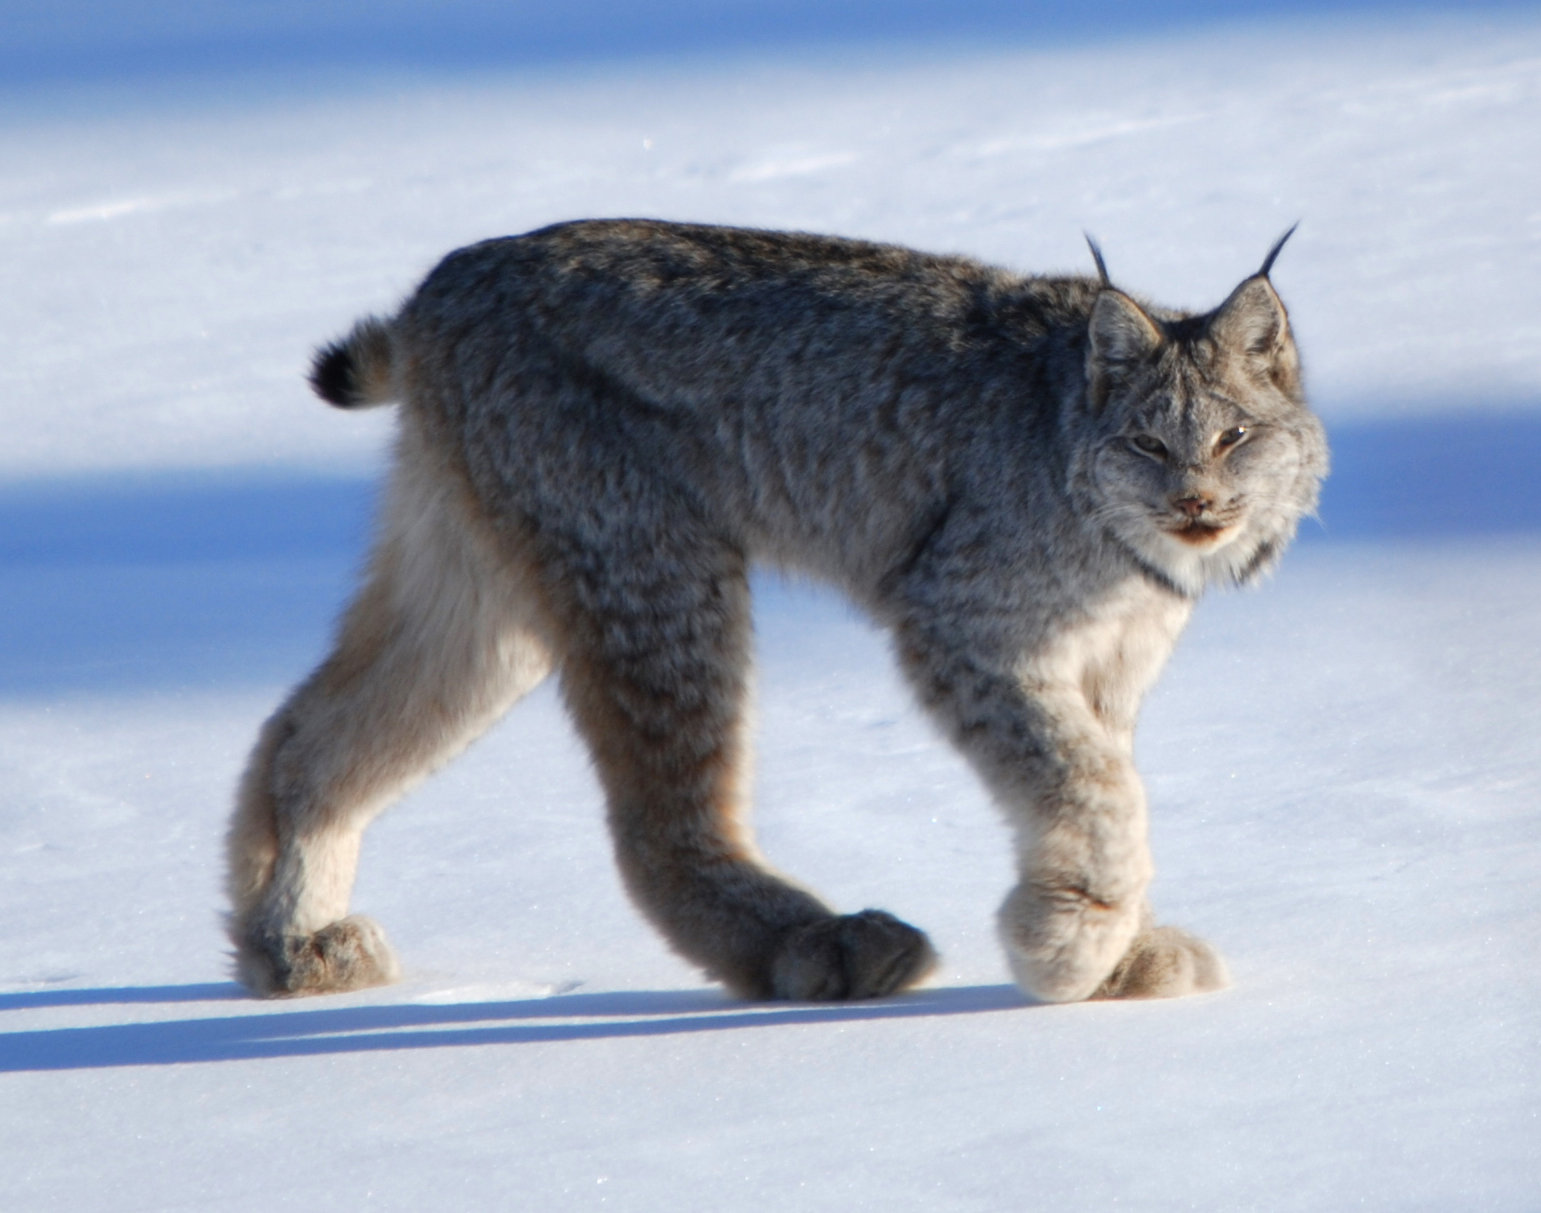 Court Acts Swiftly to Aid Rare Canada Lynx